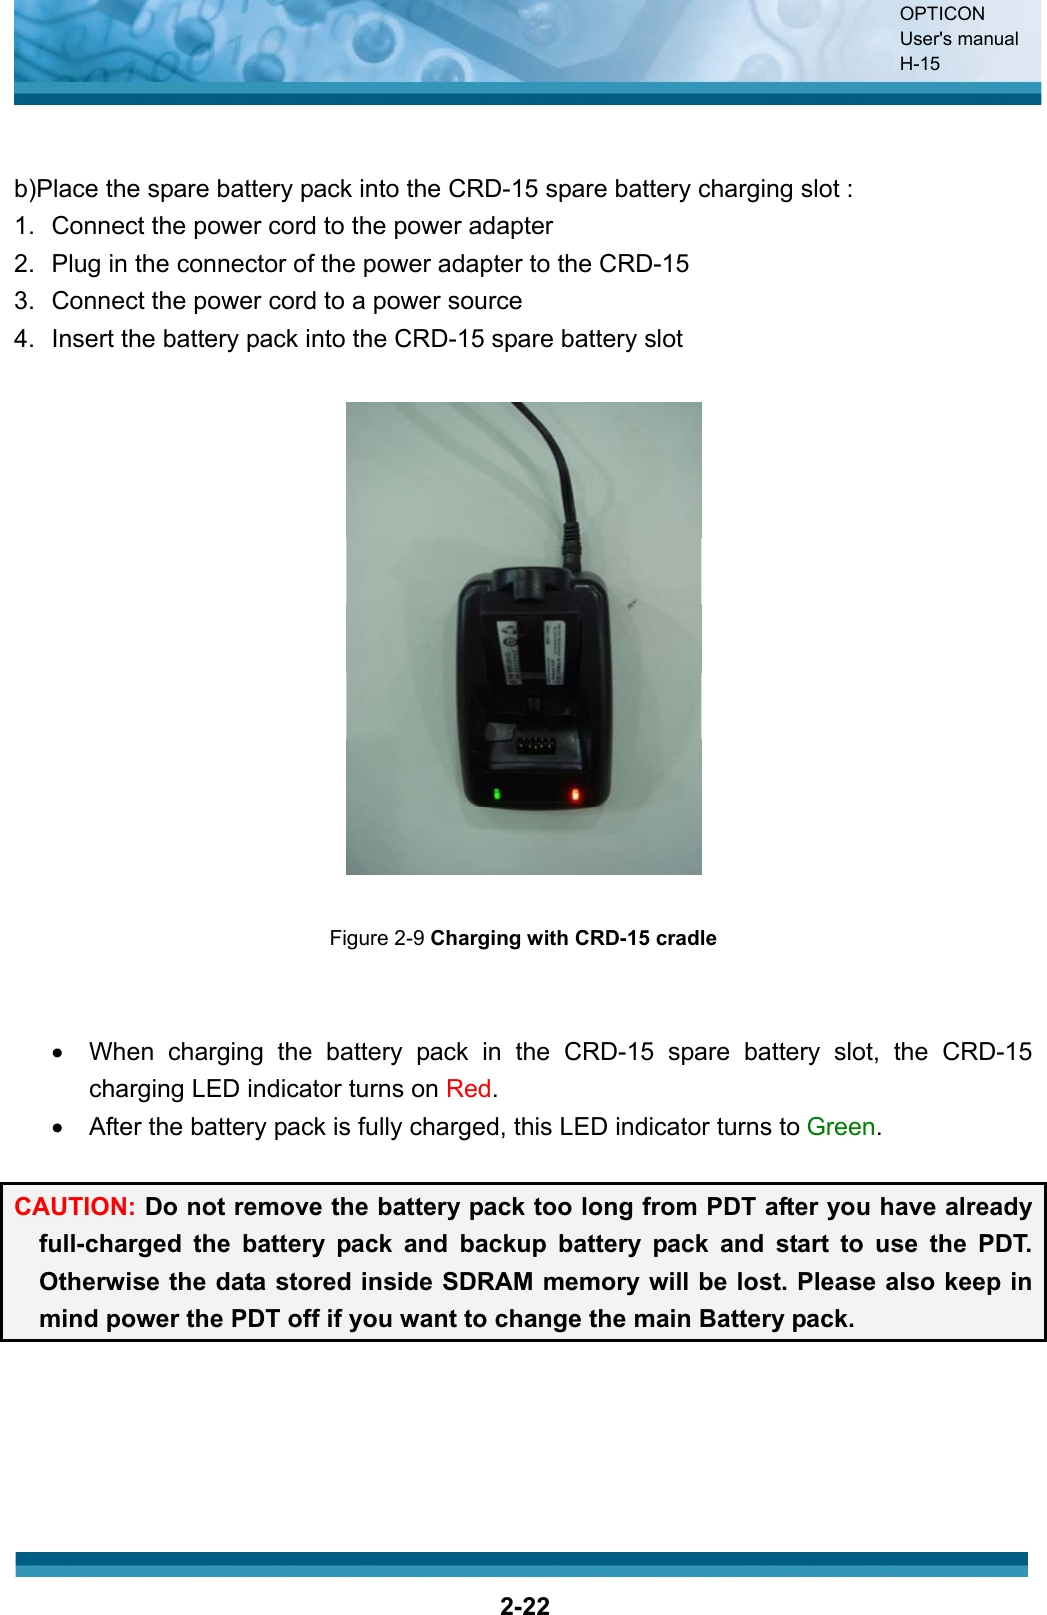 OPTICON User&apos;s manual H-152-22b)Place the spare battery pack into the CRD-15 spare battery charging slot : 1.  Connect the power cord to the power adapter 2.  Plug in the connector of the power adapter to the CRD-15 3.  Connect the power cord to a power source 4.  Insert the battery pack into the CRD-15 spare battery slot Figure 2-9 Charging with CRD-15 cradlex  When charging the battery pack in the CRD-15 spare battery slot, the CRD-15 charging LED indicator turns on Red.x  After the battery pack is fully charged, this LED indicator turns to Green.CAUTION: Do not remove the battery pack too long from PDT after you have already full-charged the battery pack and backup battery pack and start to use the PDT. Otherwise the data stored inside SDRAM memory will be lost. Please also keep in mind power the PDT off if you want to change the main Battery pack. 